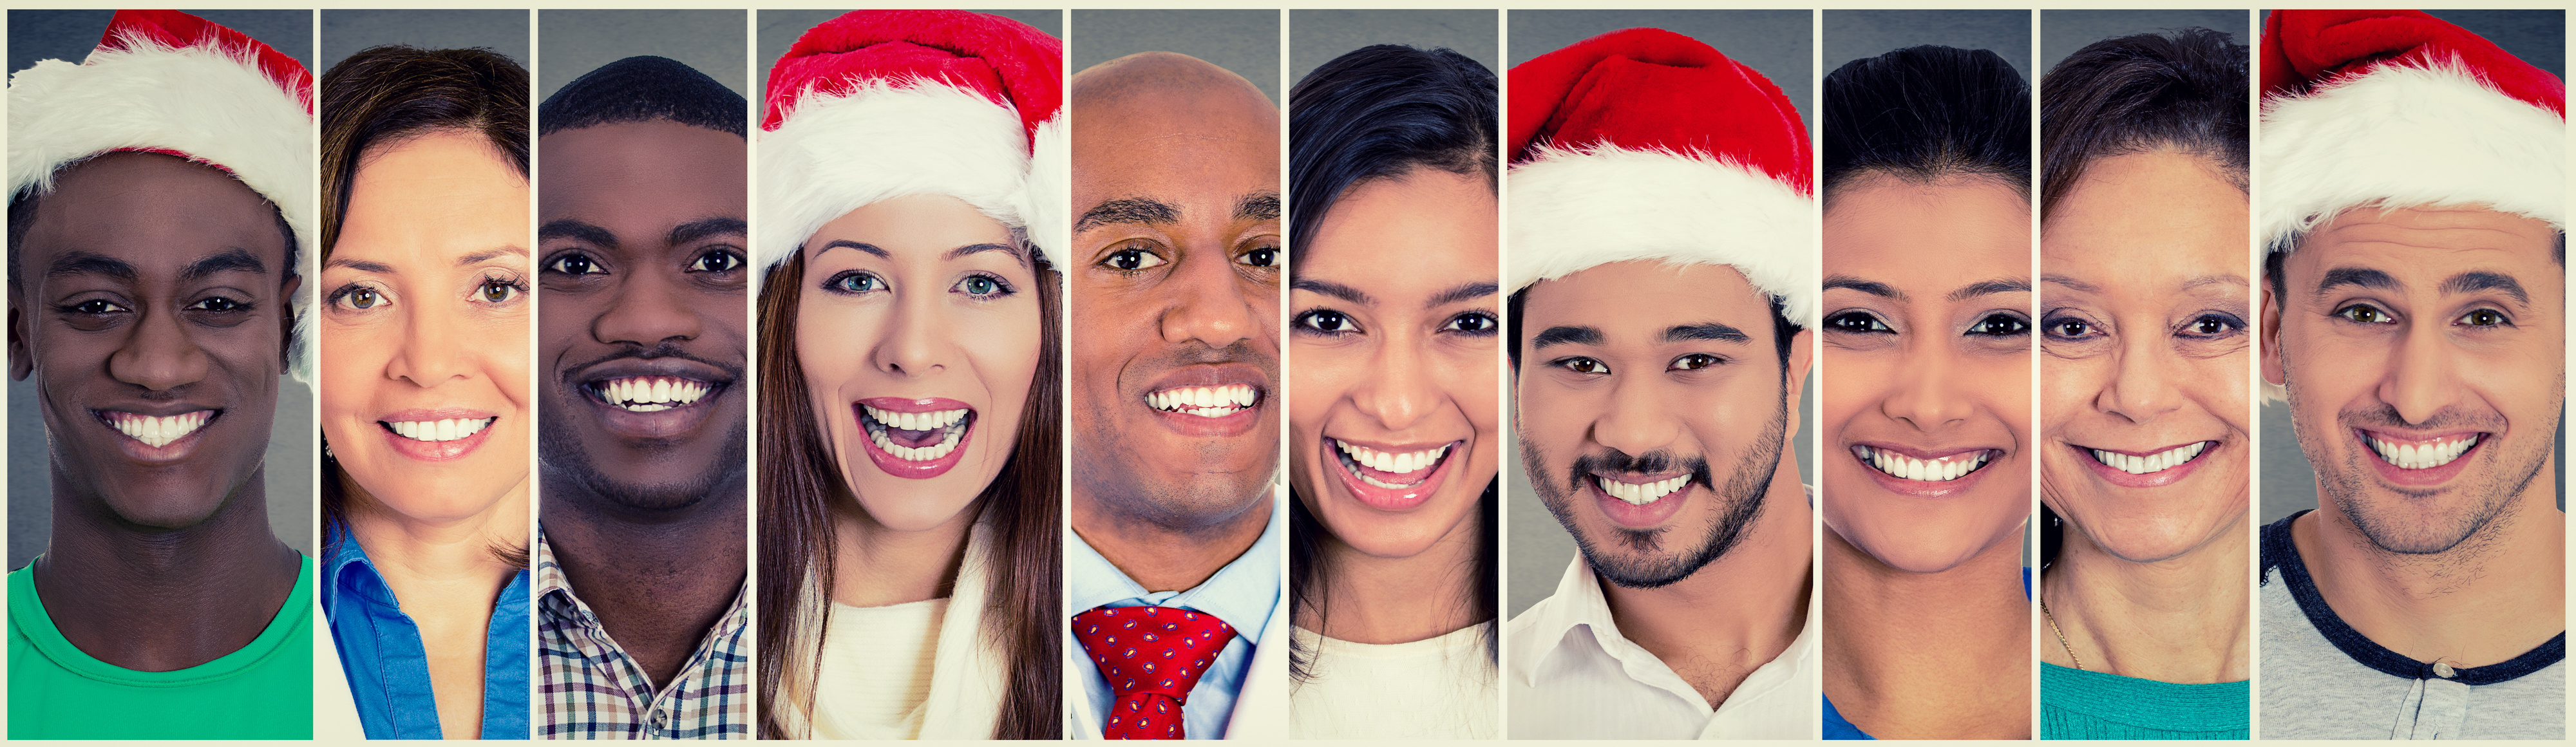 Smiling faces. Happy multi ethnic group of people some in Christmas Santa hat